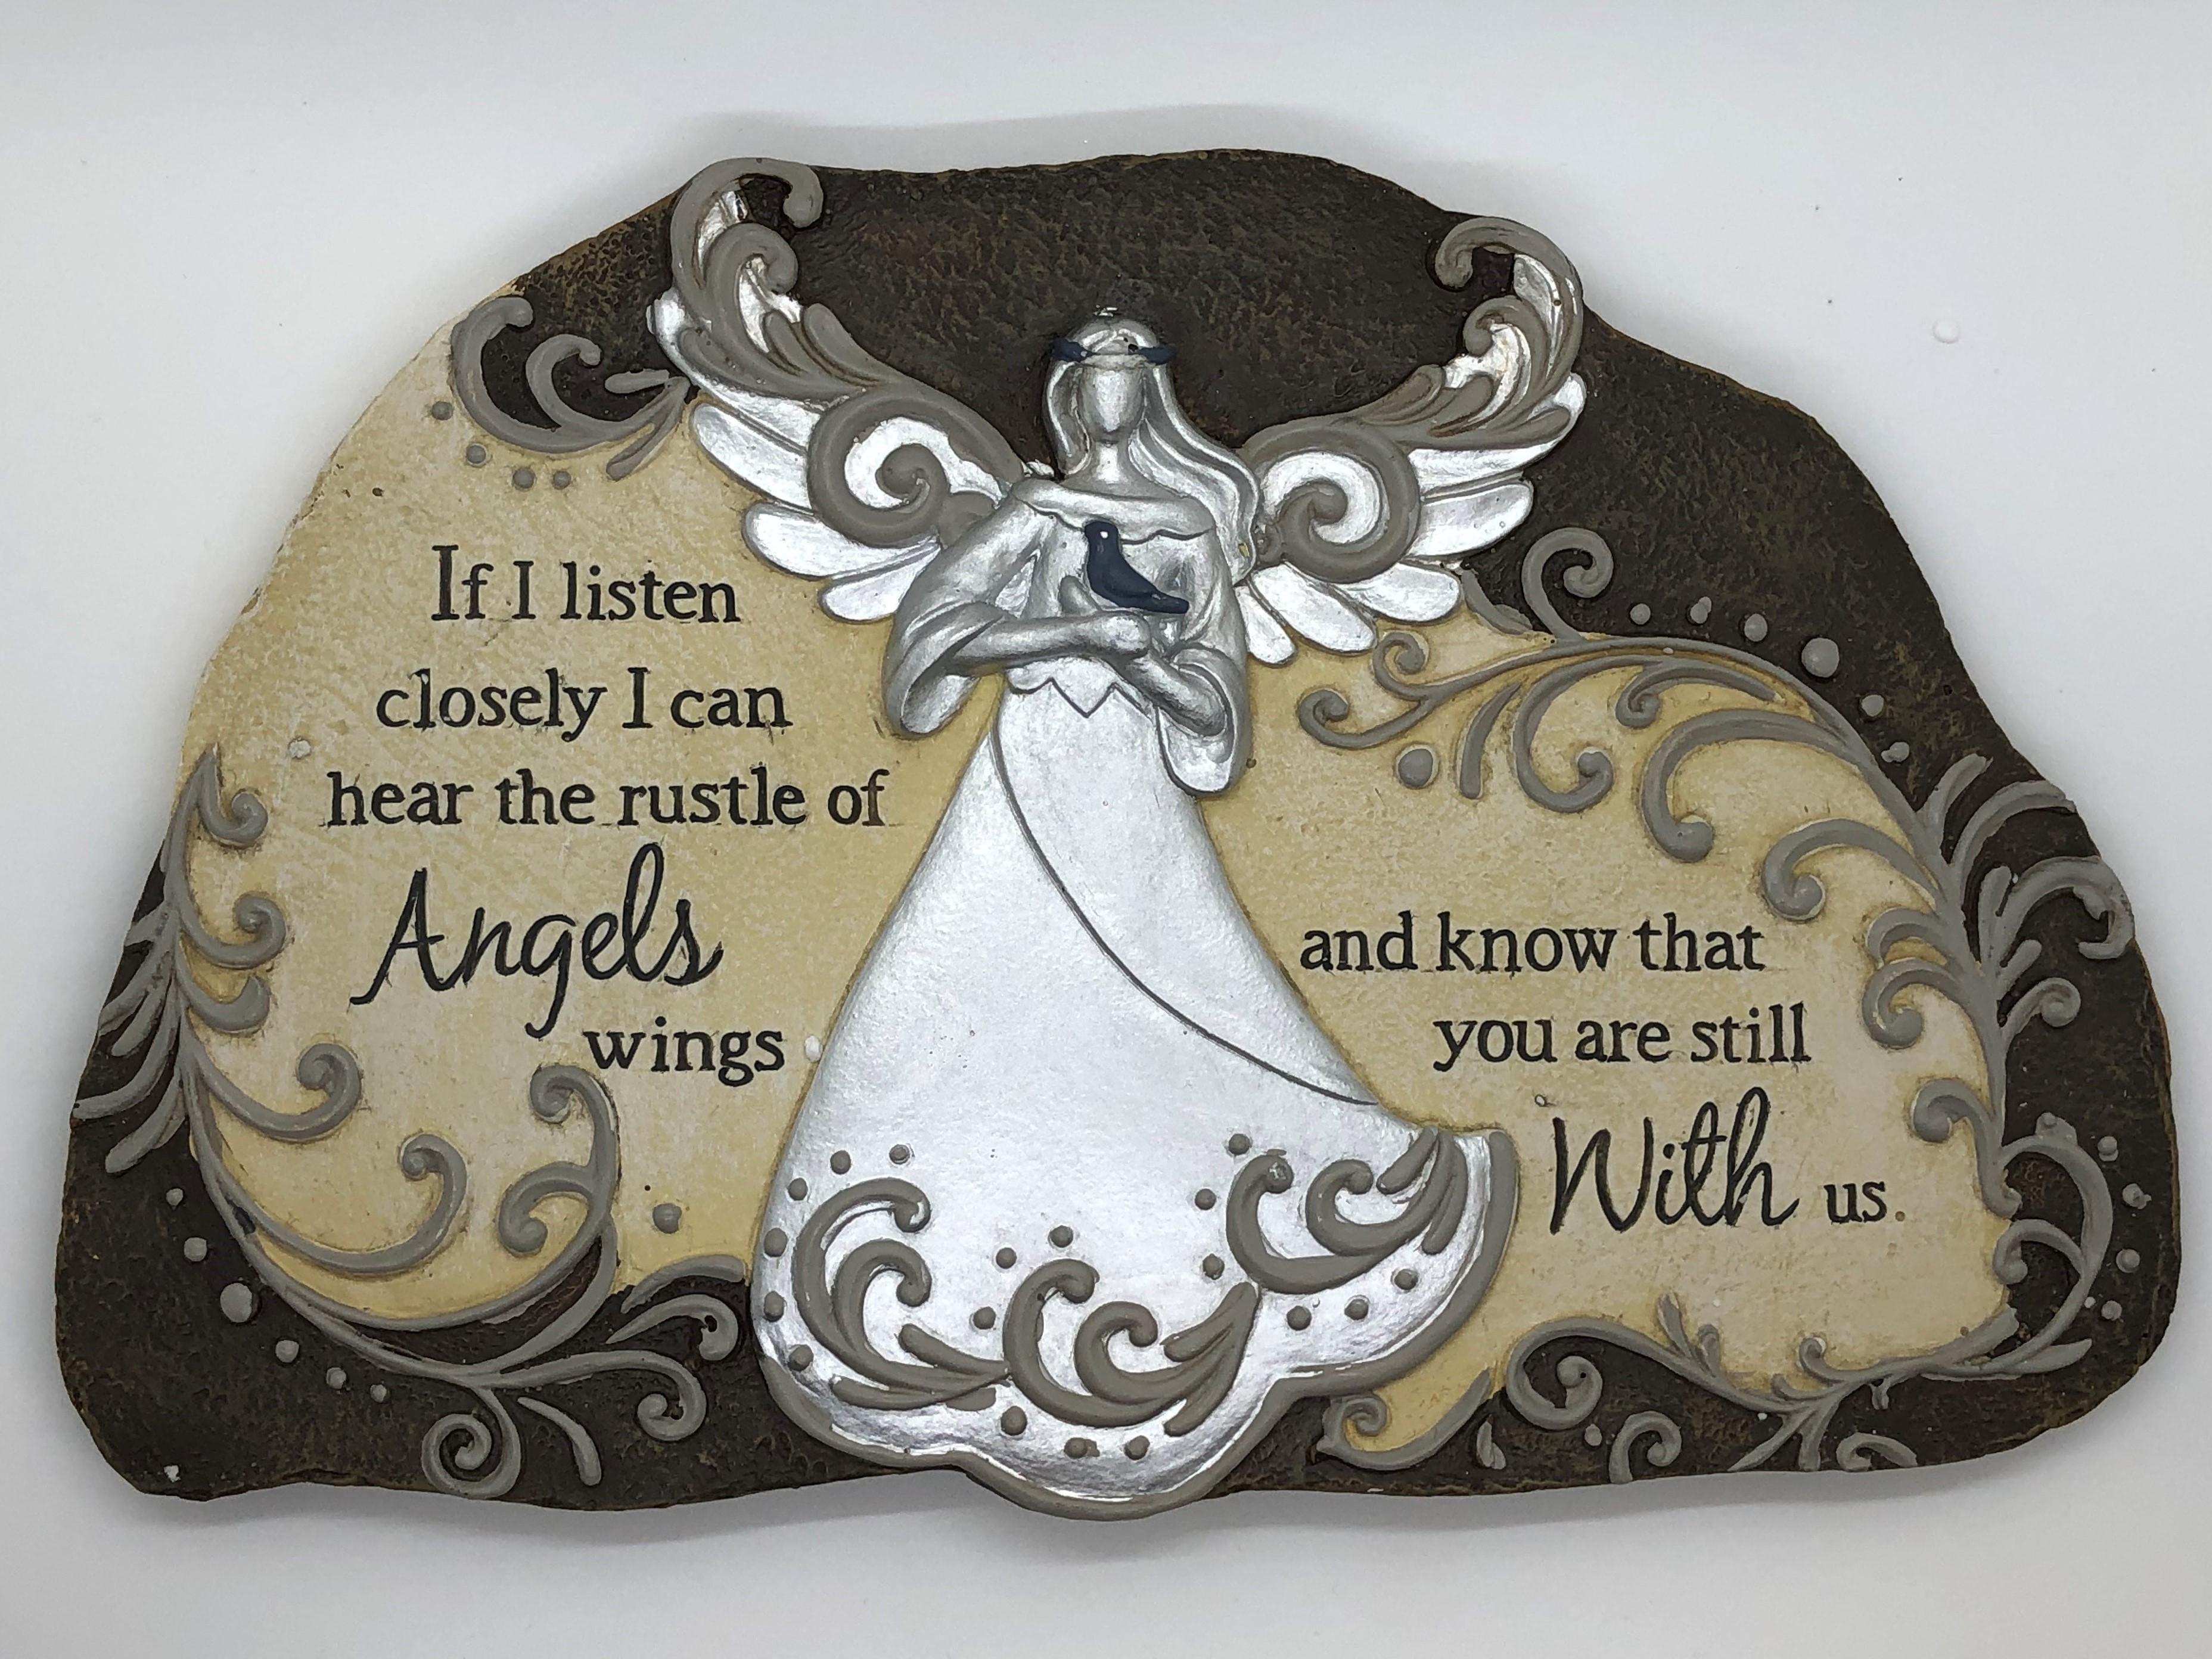 Garden Plaque Stepping Stone - If I listen closely I can hear the rustle of Angels wings